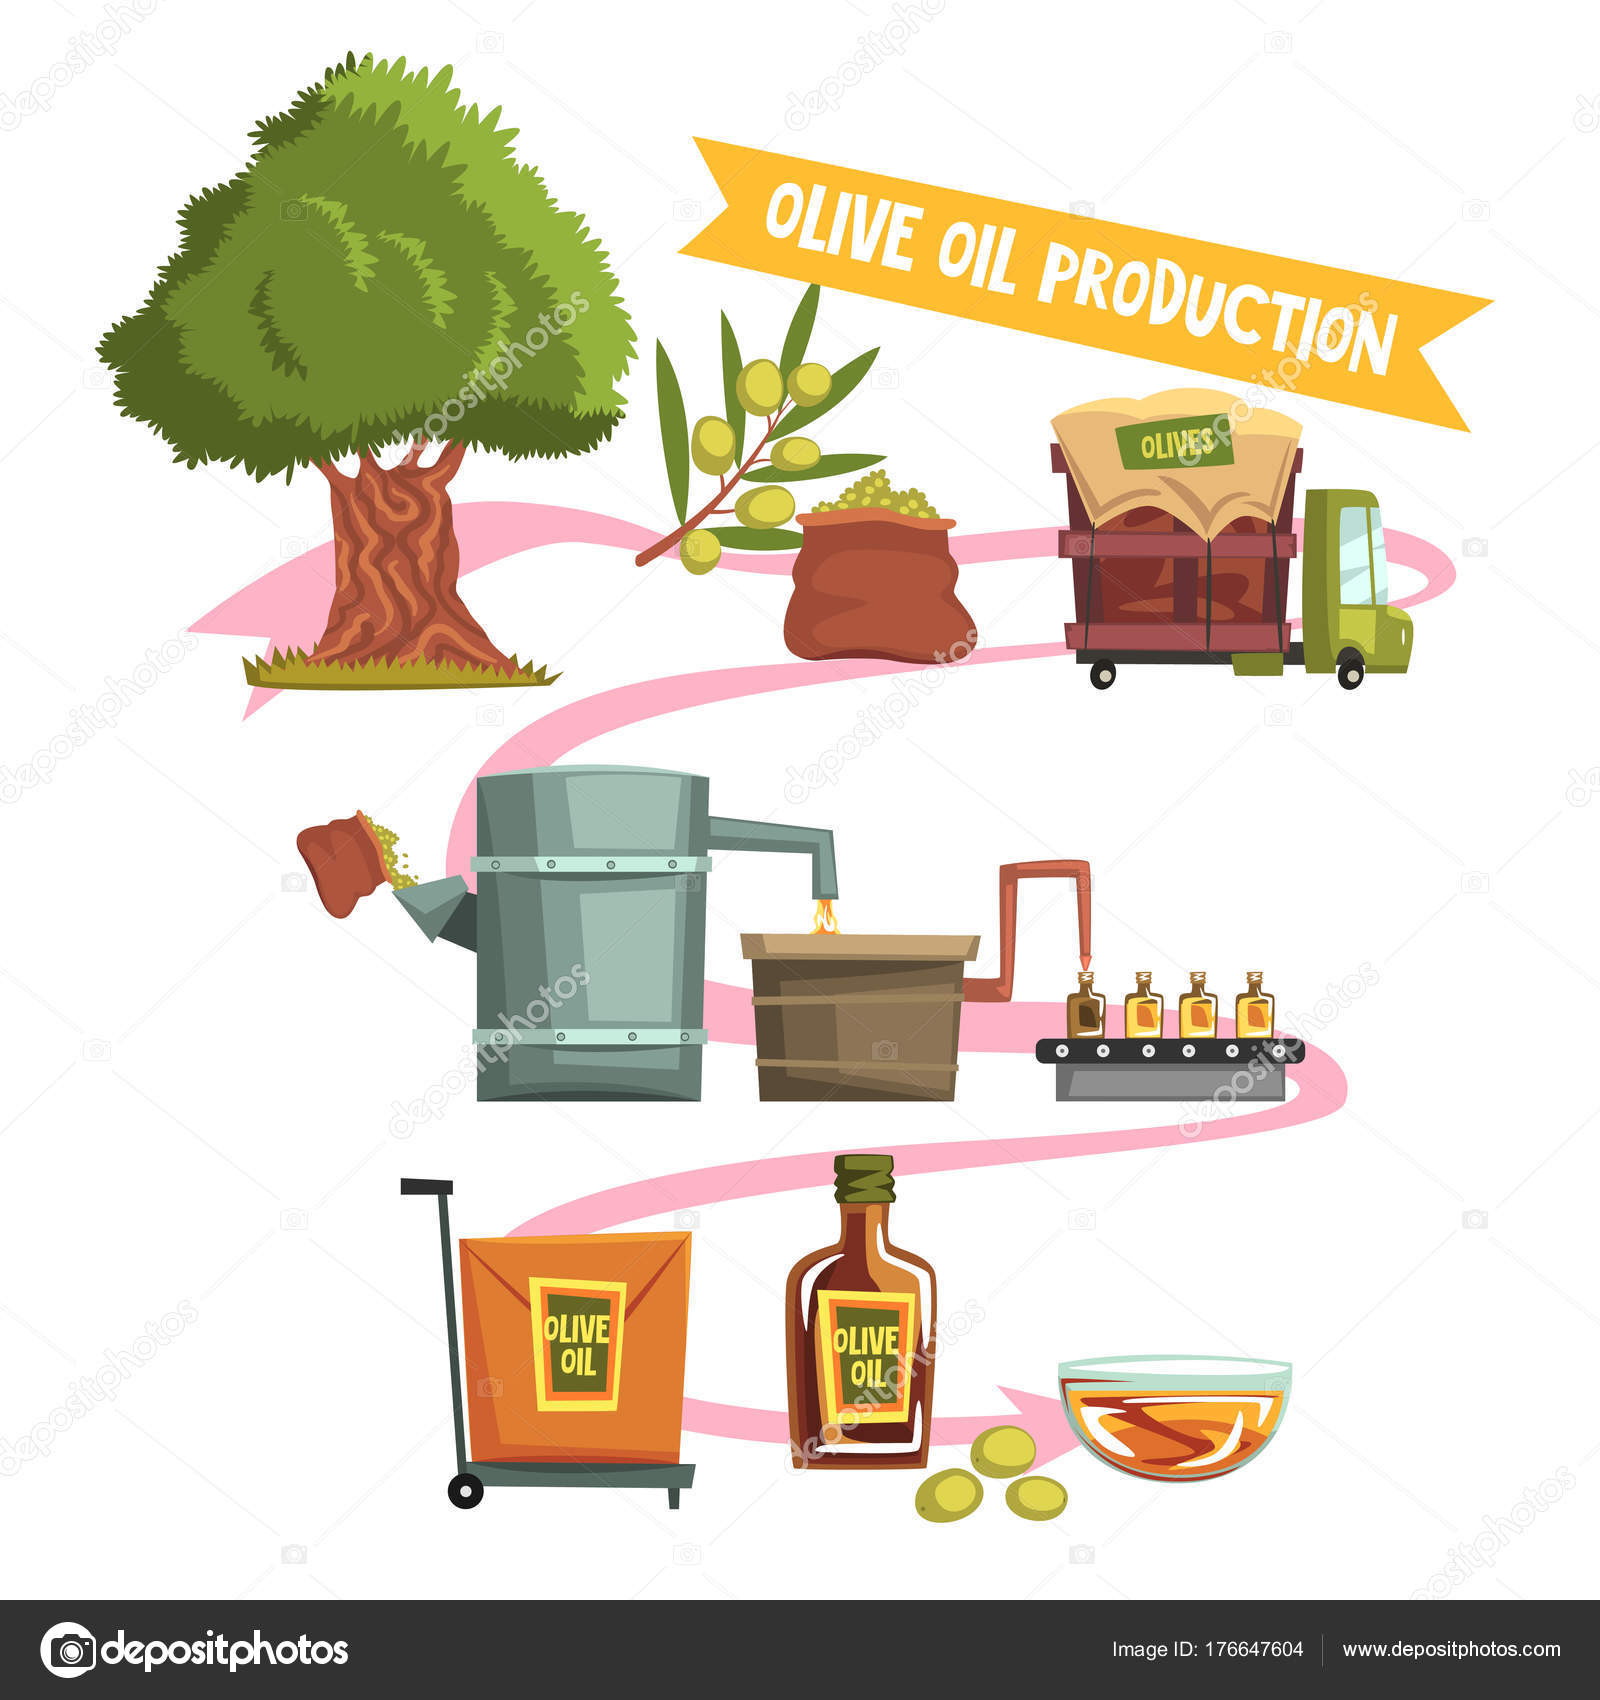 Process of olive oil production from cultivation to finished product ...